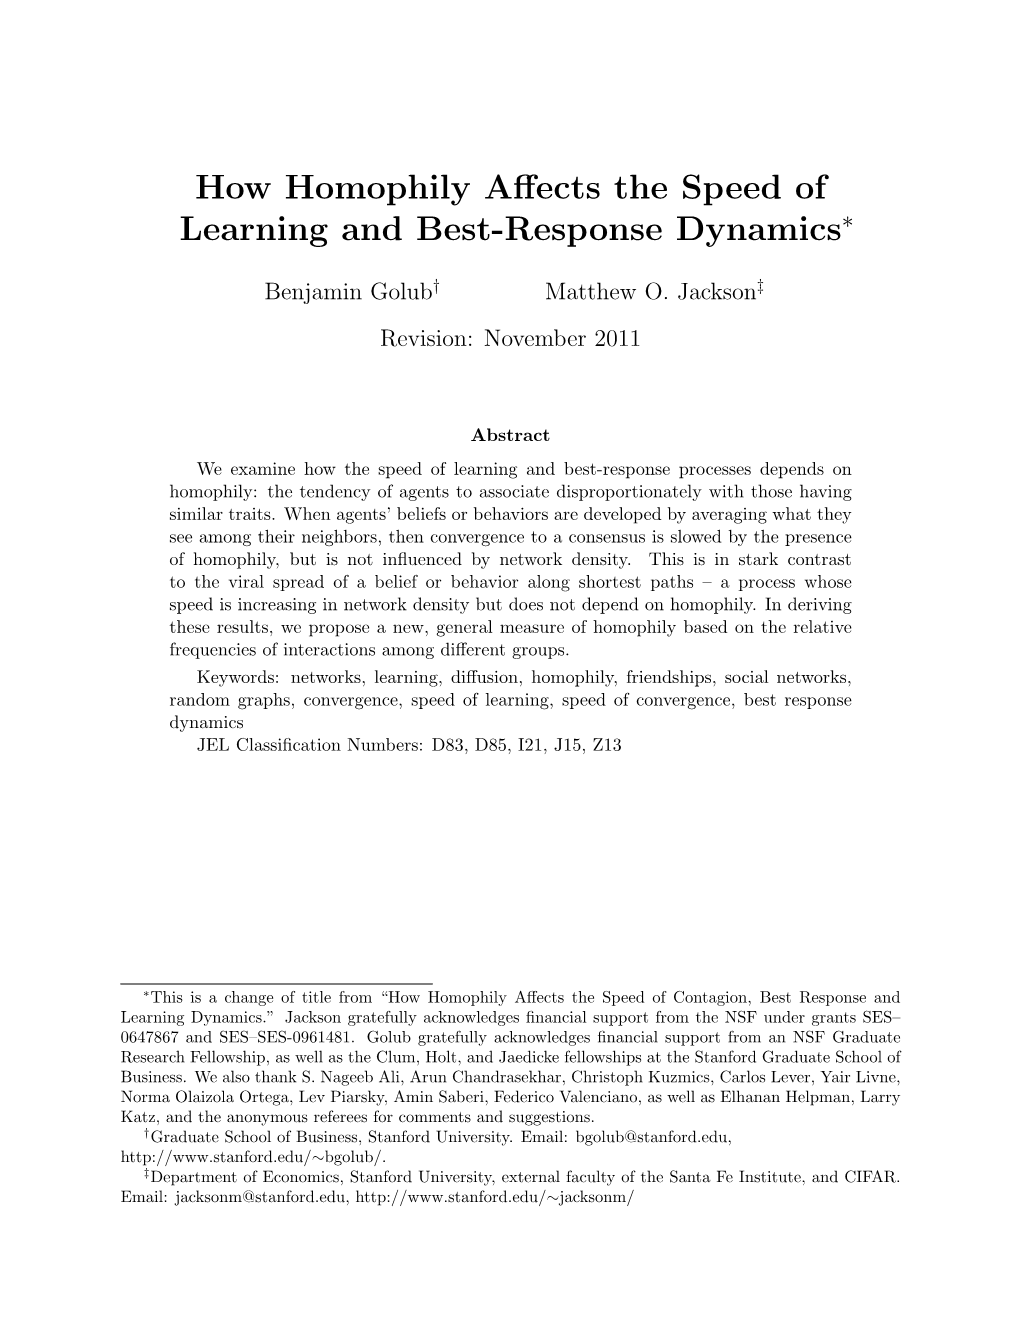 How Homophily Affects the Speed of Learning and Best-Response